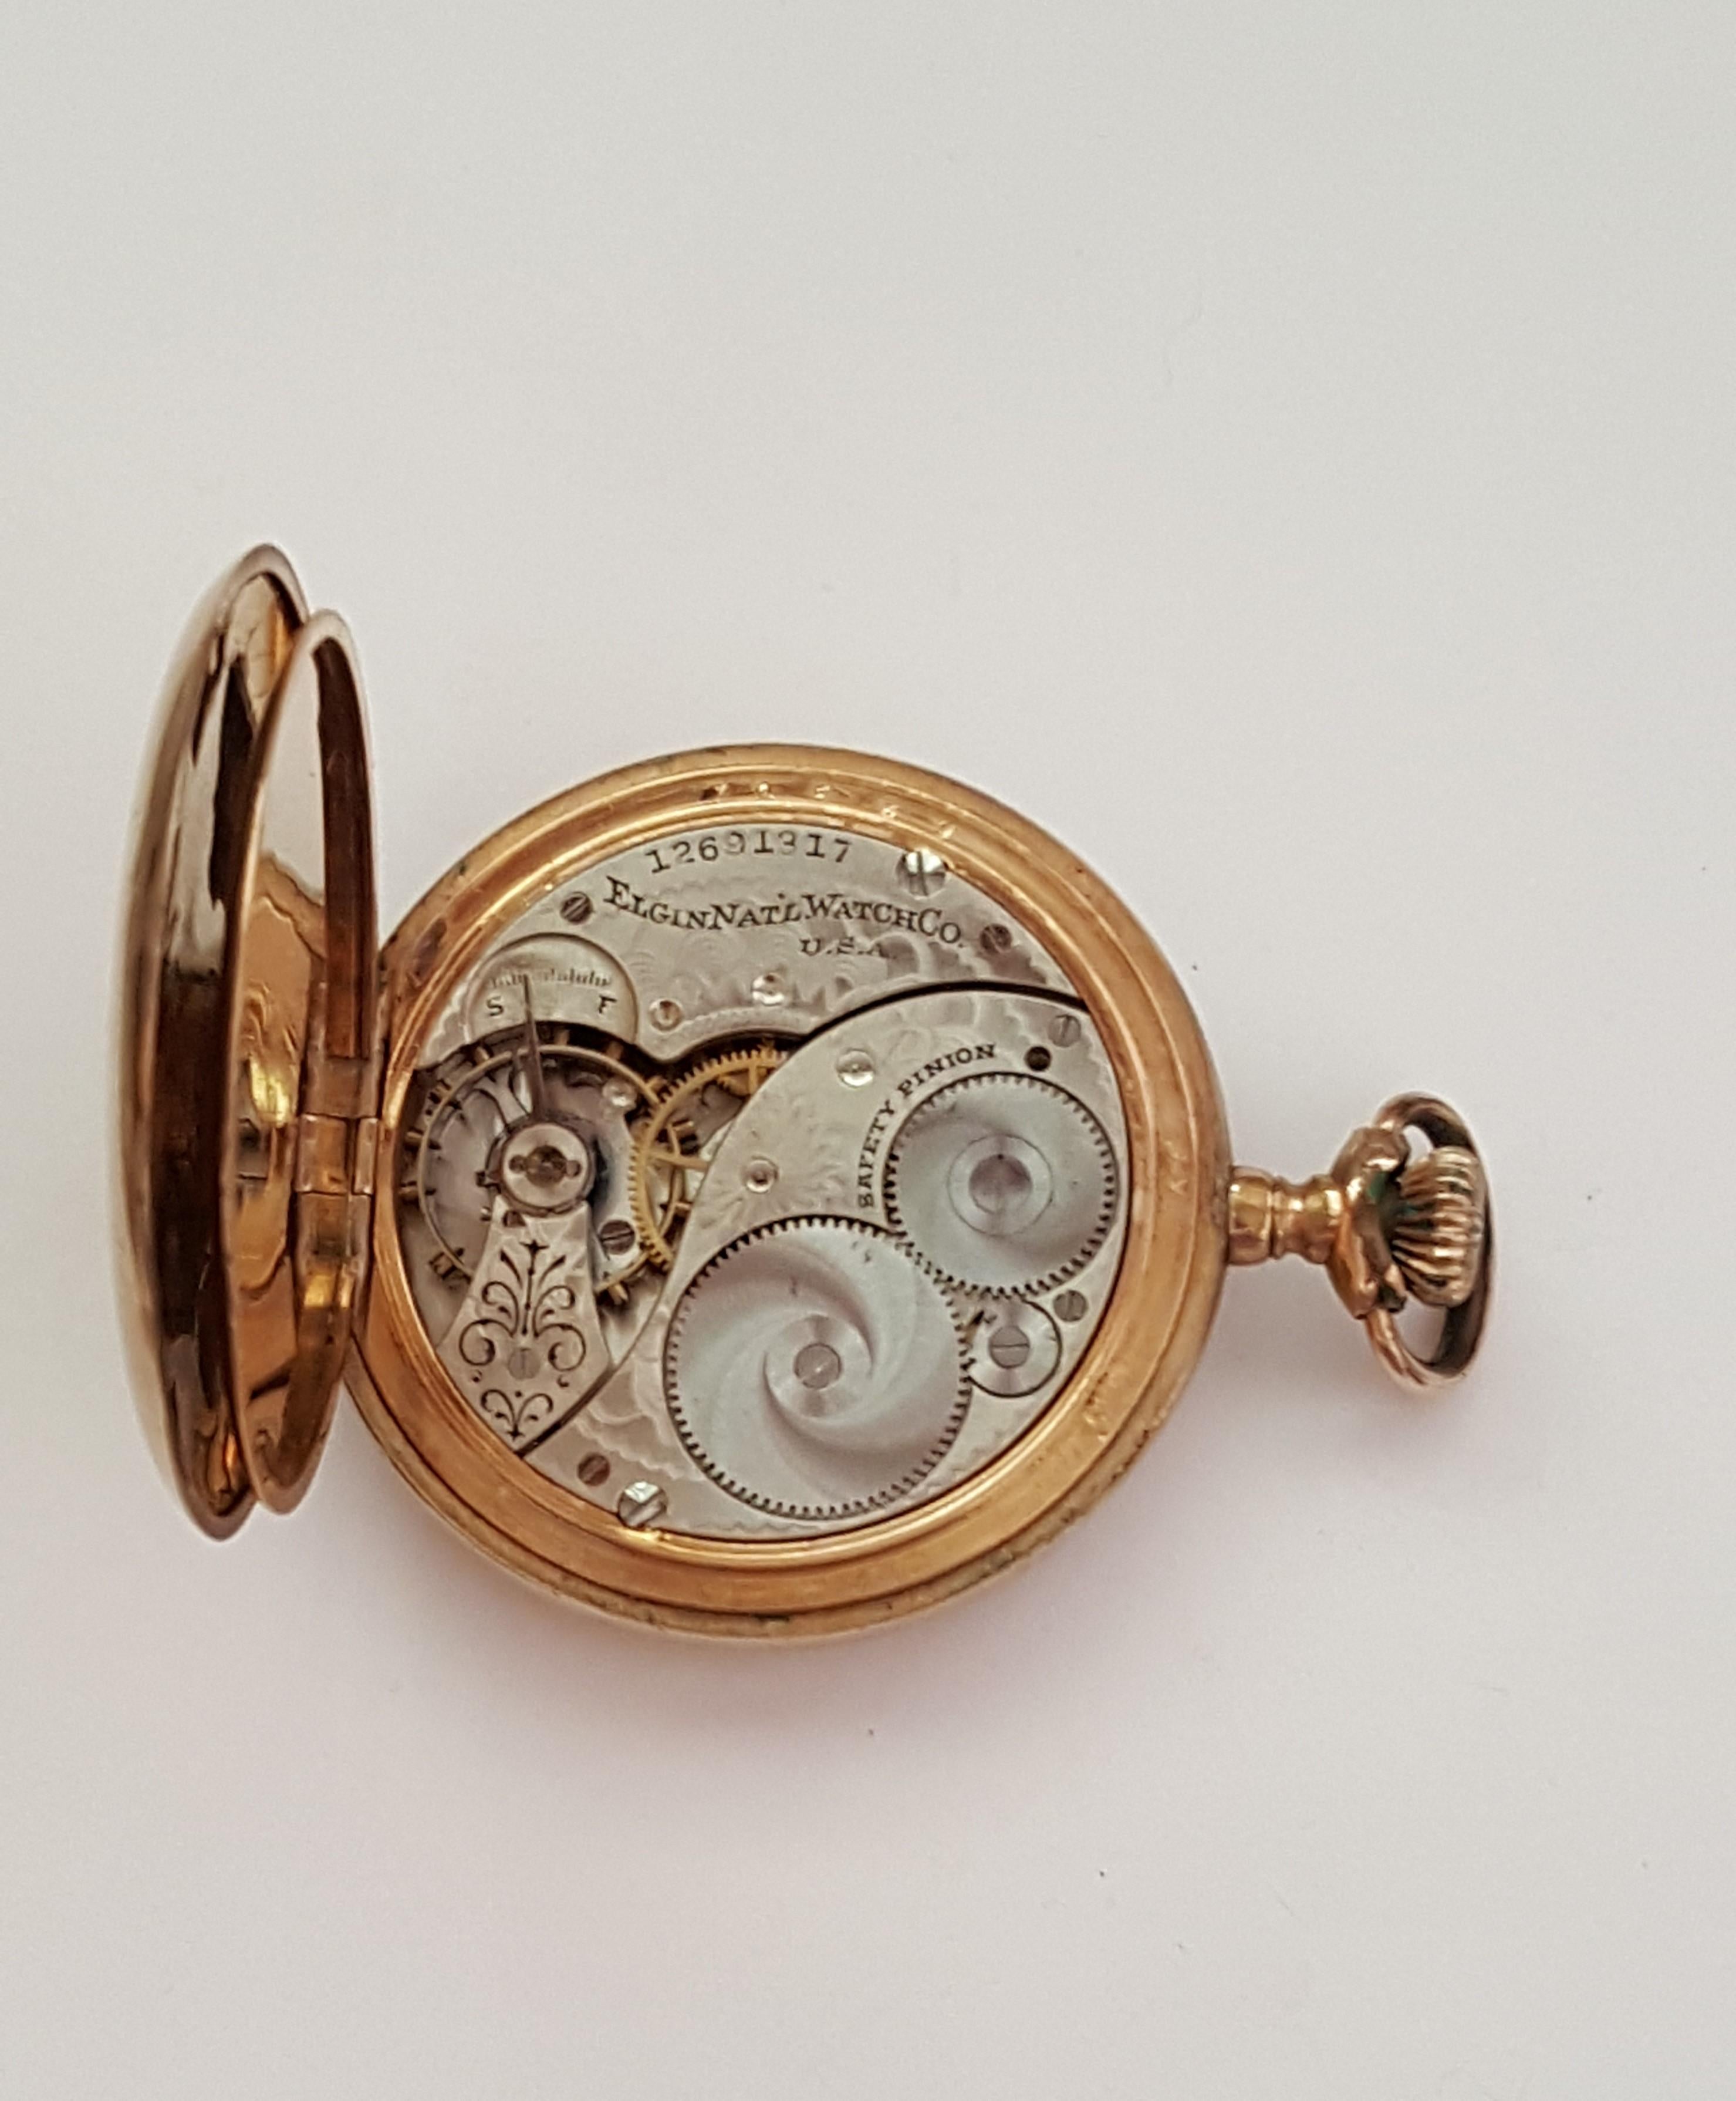 Vintage Elgin Gold Plated Pocket Watch, Year 1907, Floral Bird Case, 7 Jewel, Size 12s, Hunting, Model 2, Grade 301, Very Good Condition, 46mm case, Off-white face with black Roman Numerals.

Currently this watch is not working. This watch has not